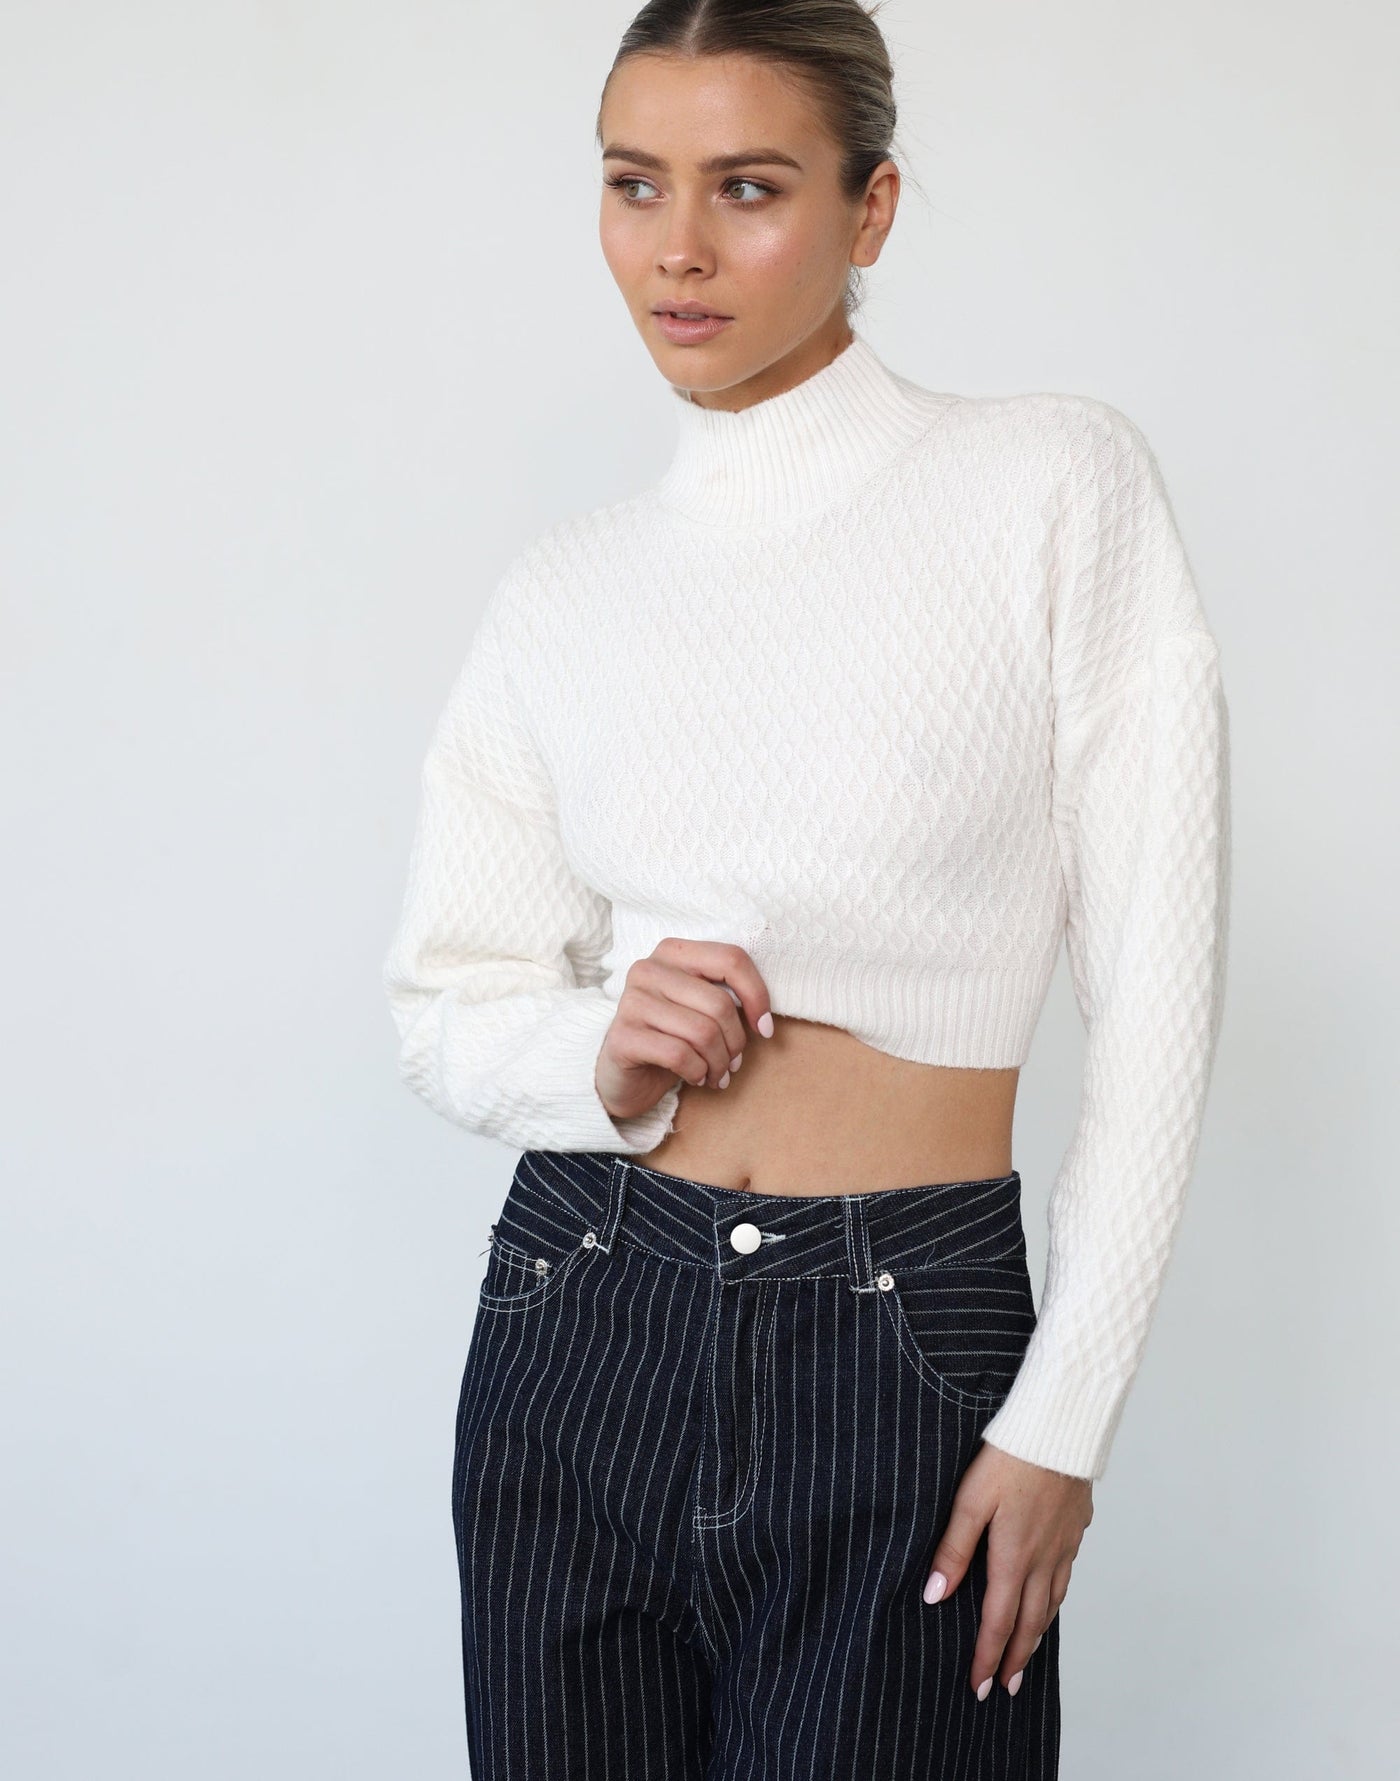 Helena Jumper (White) - Open Back Cropped Jumper - Women's Tops - Charcoal Clothing